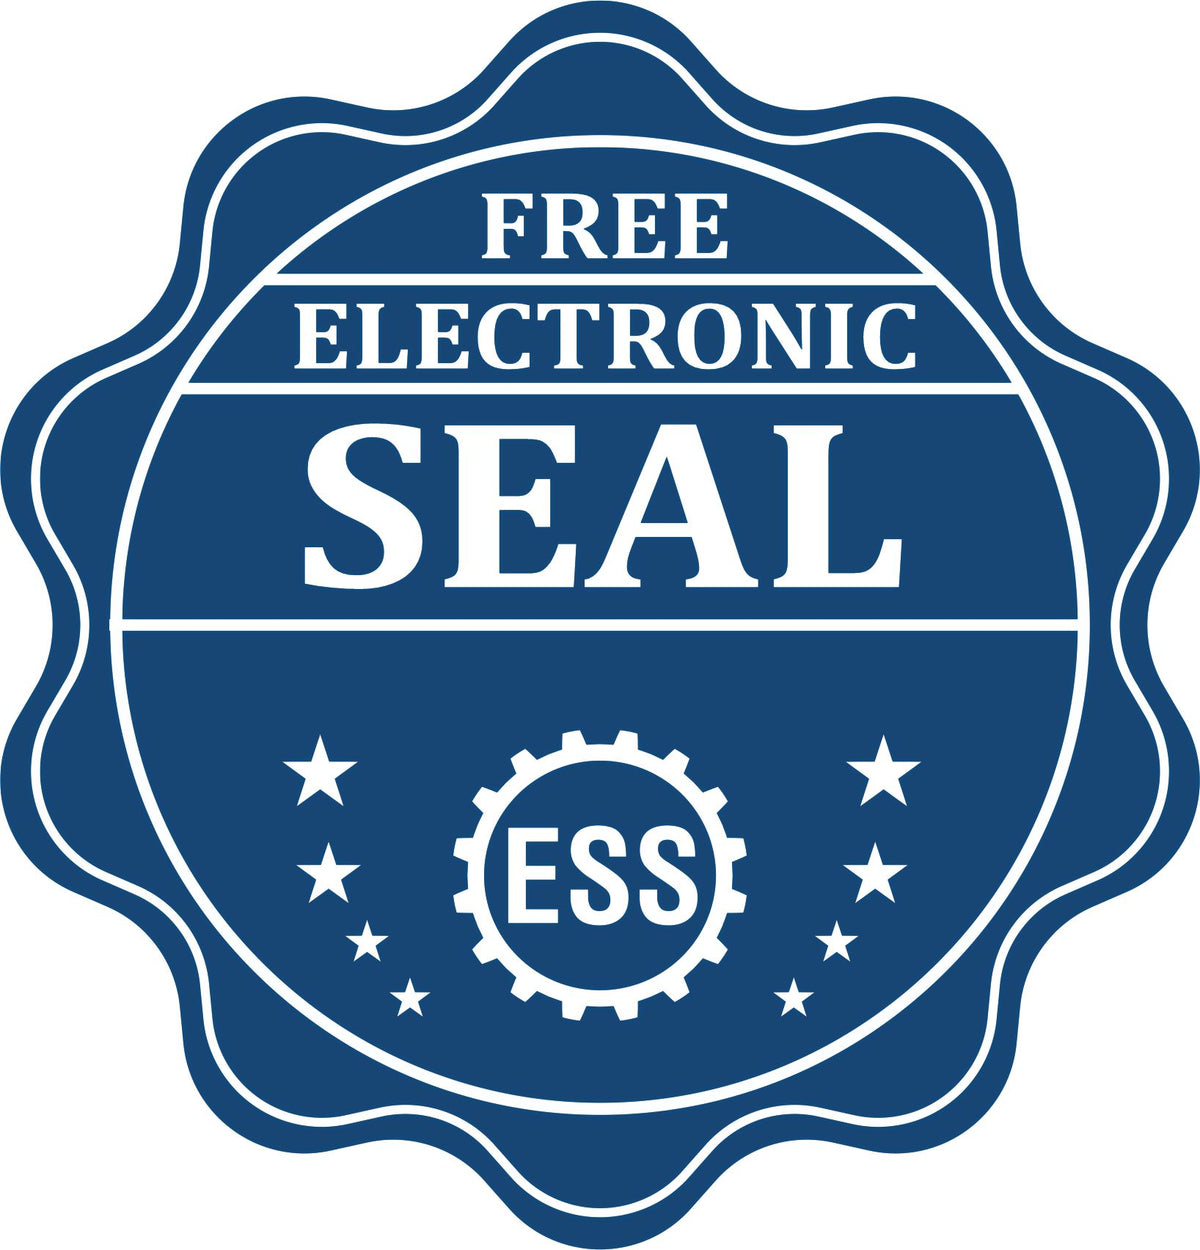 A badge showing a free electronic seal for the Long Reach Arkansas Land Surveyor Seal with stars and the ESS gear on the emblem.